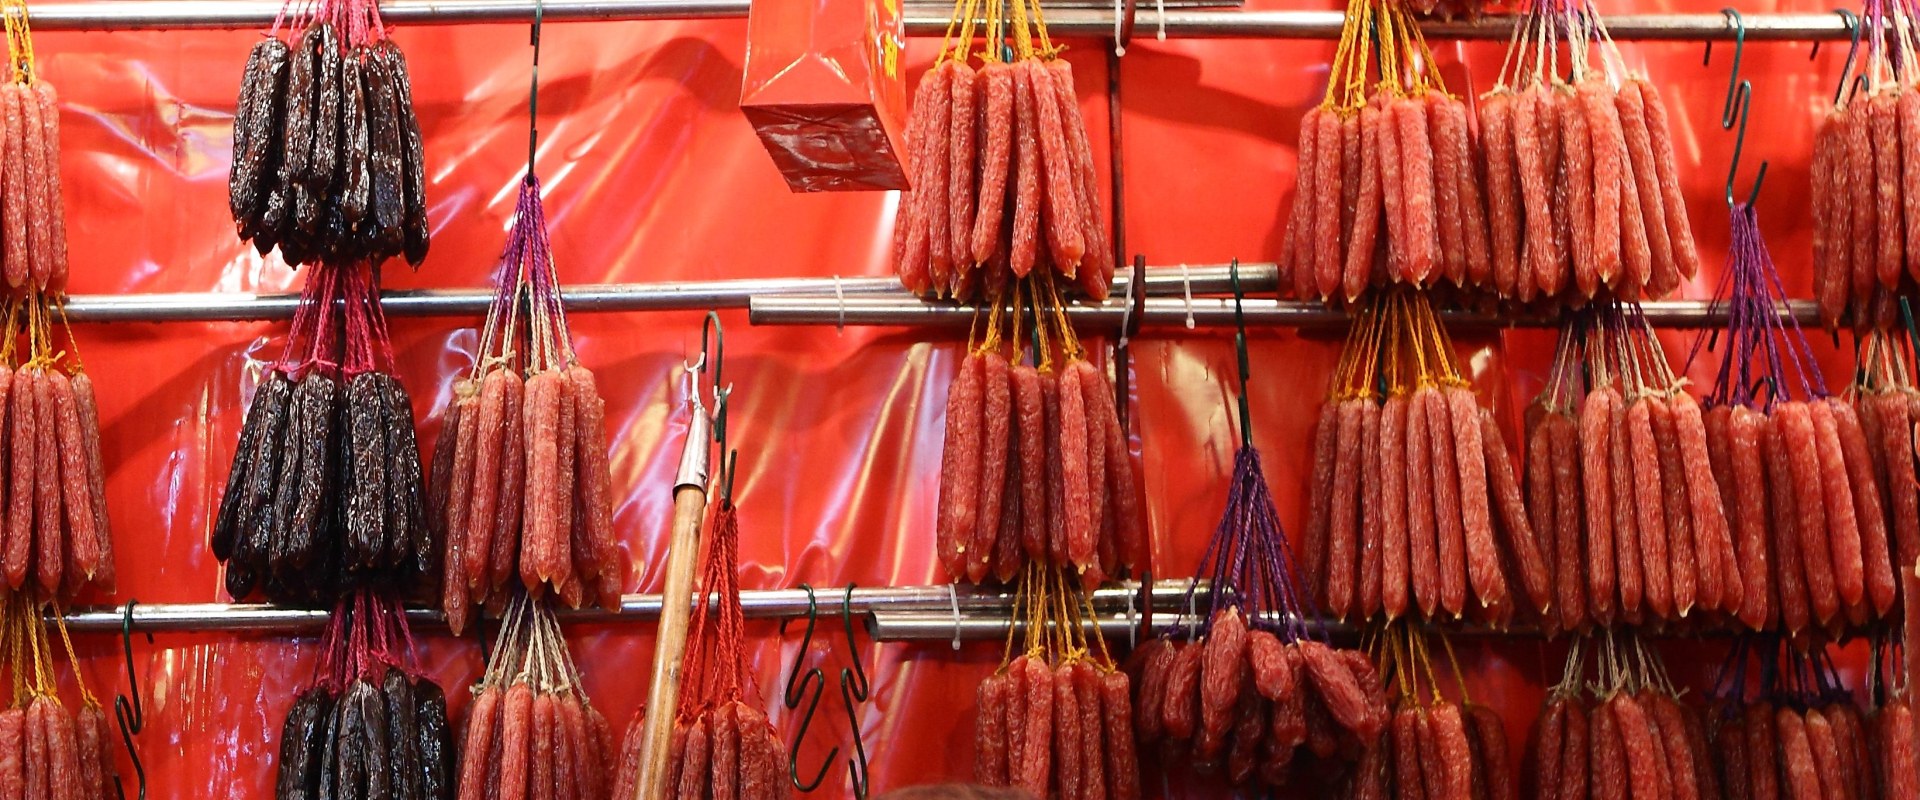 What is the difference between chorizo and chinese sausage?